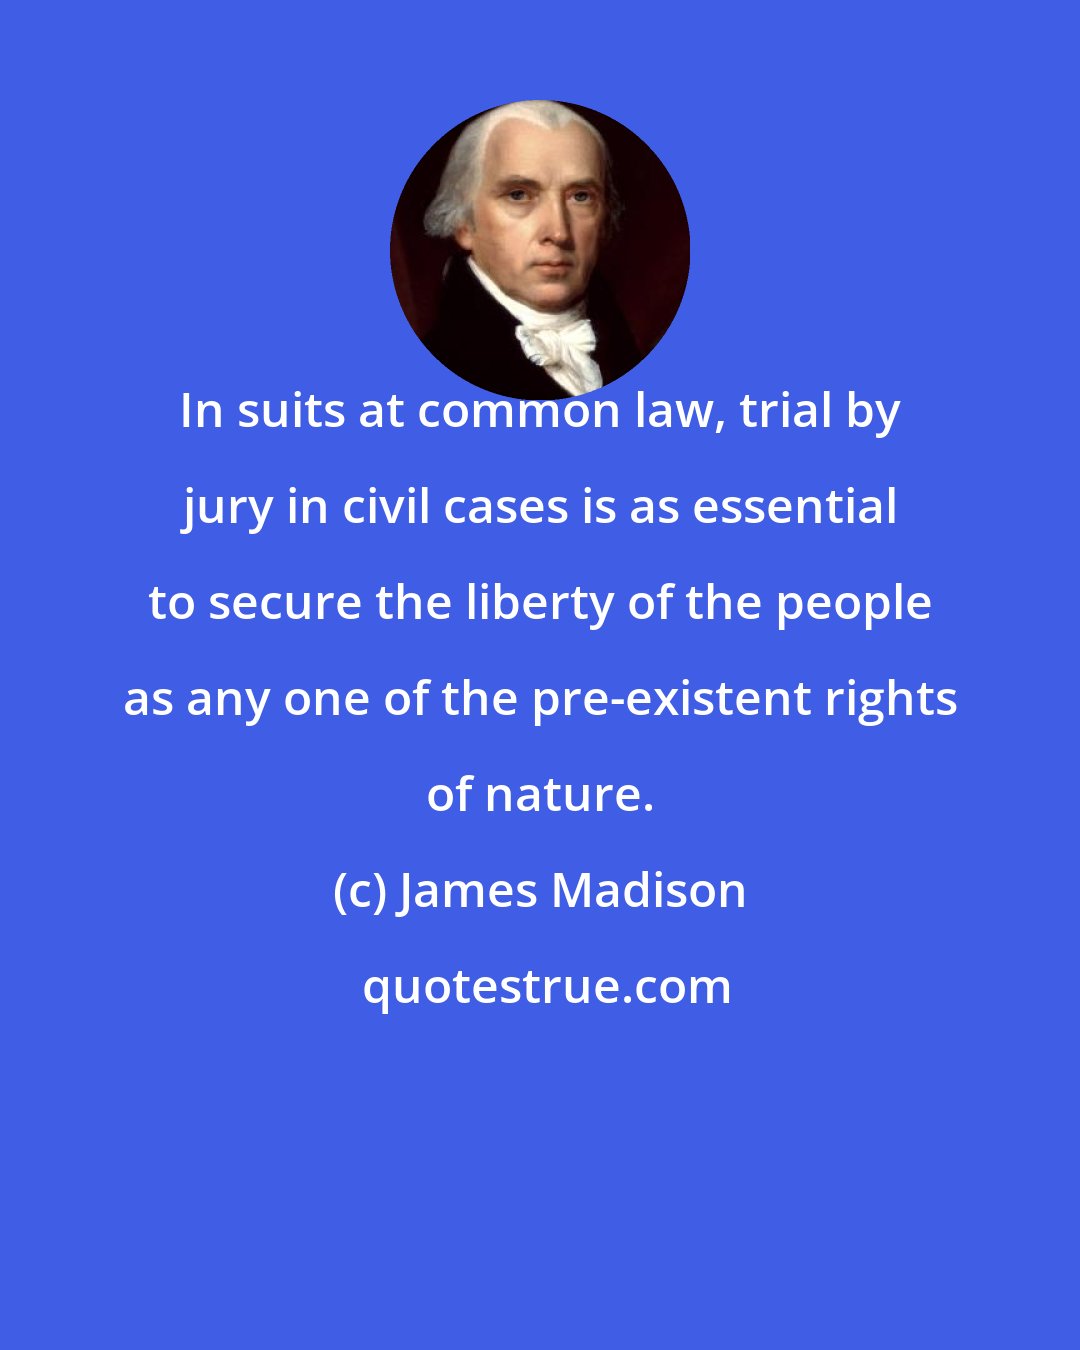 James Madison: In suits at common law, trial by jury in civil cases is as essential to secure the liberty of the people as any one of the pre-existent rights of nature.